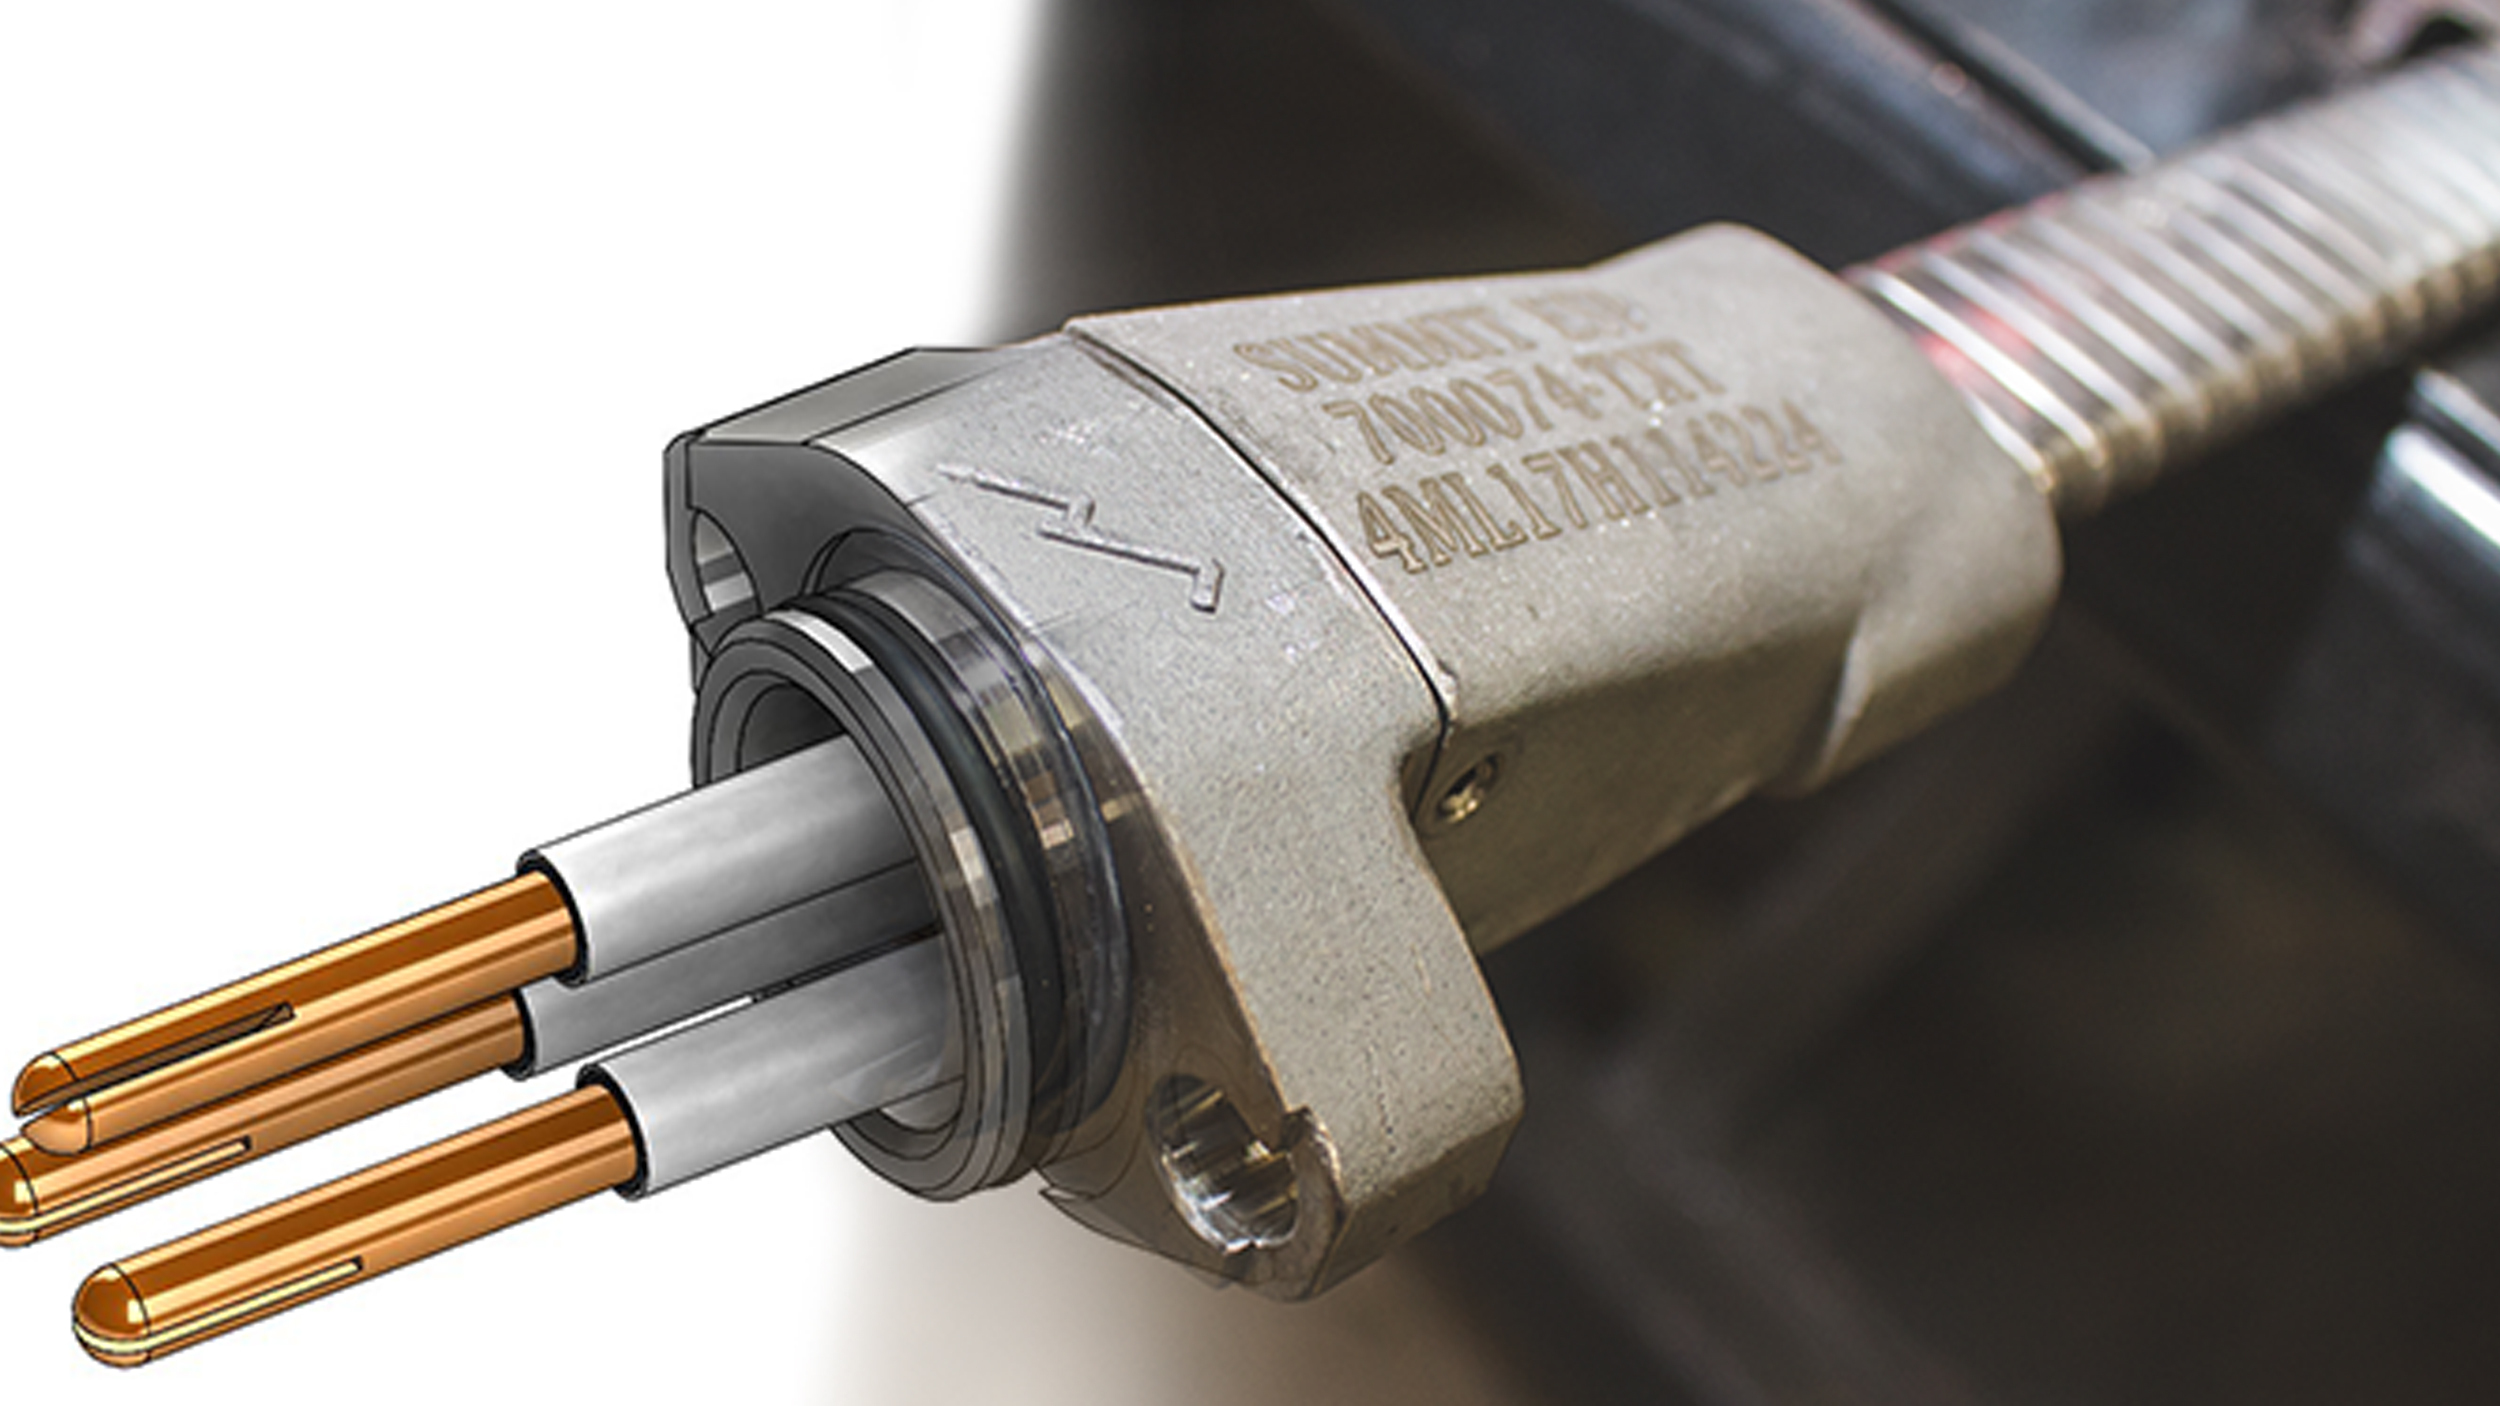 Avenger® MLE protects pump life in corrosive, high-temperature test